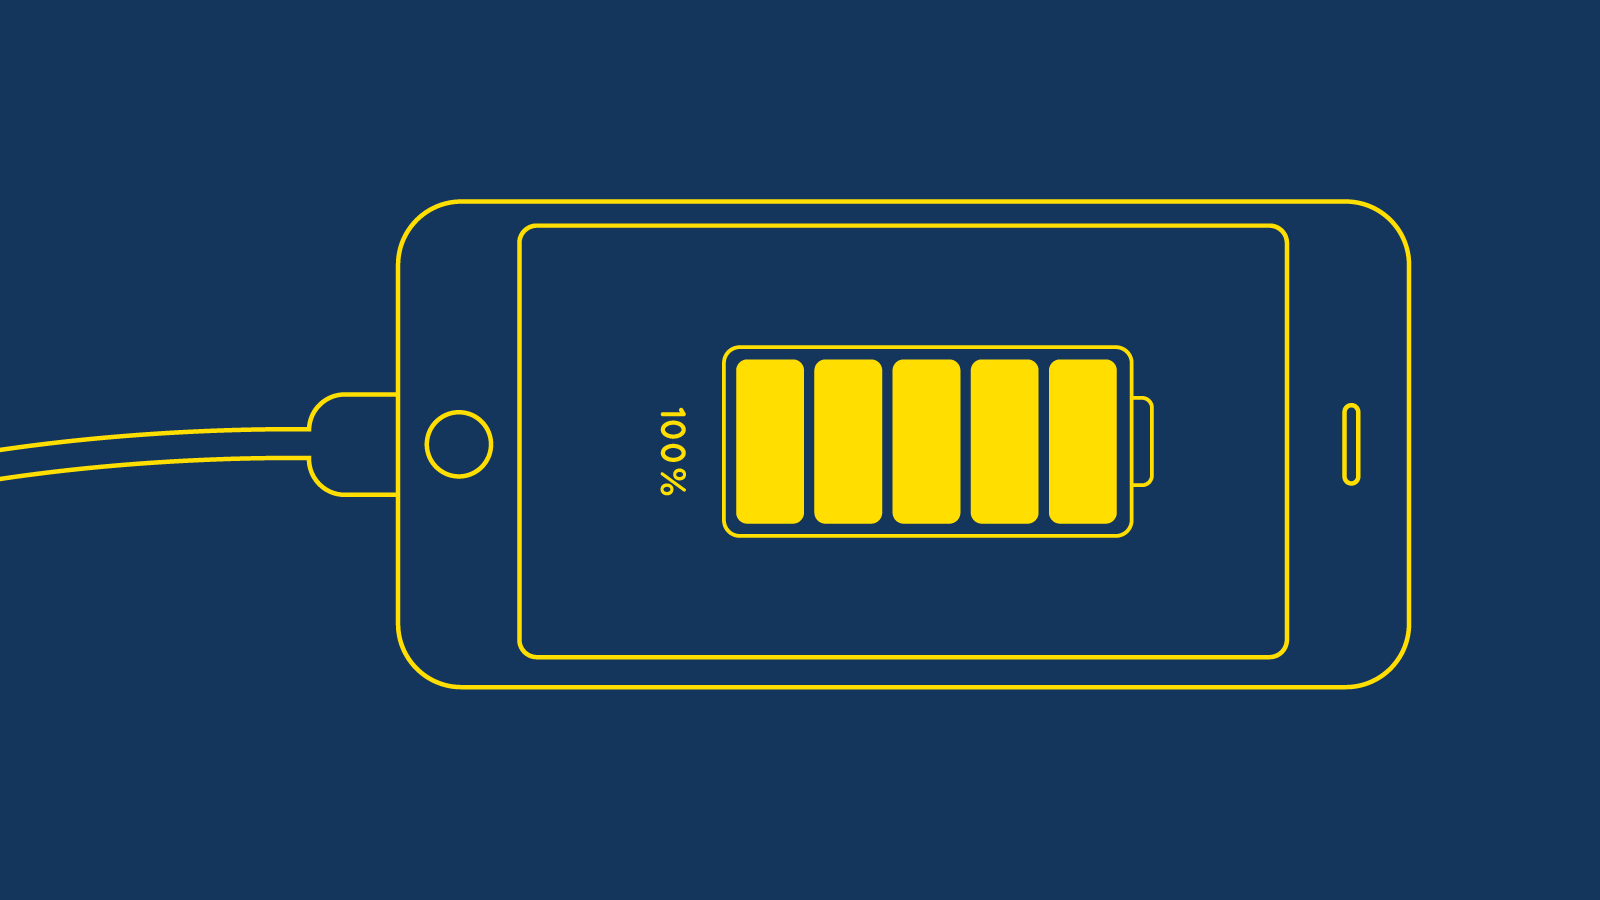 Illustration of cell phone charging with battery at 100%.